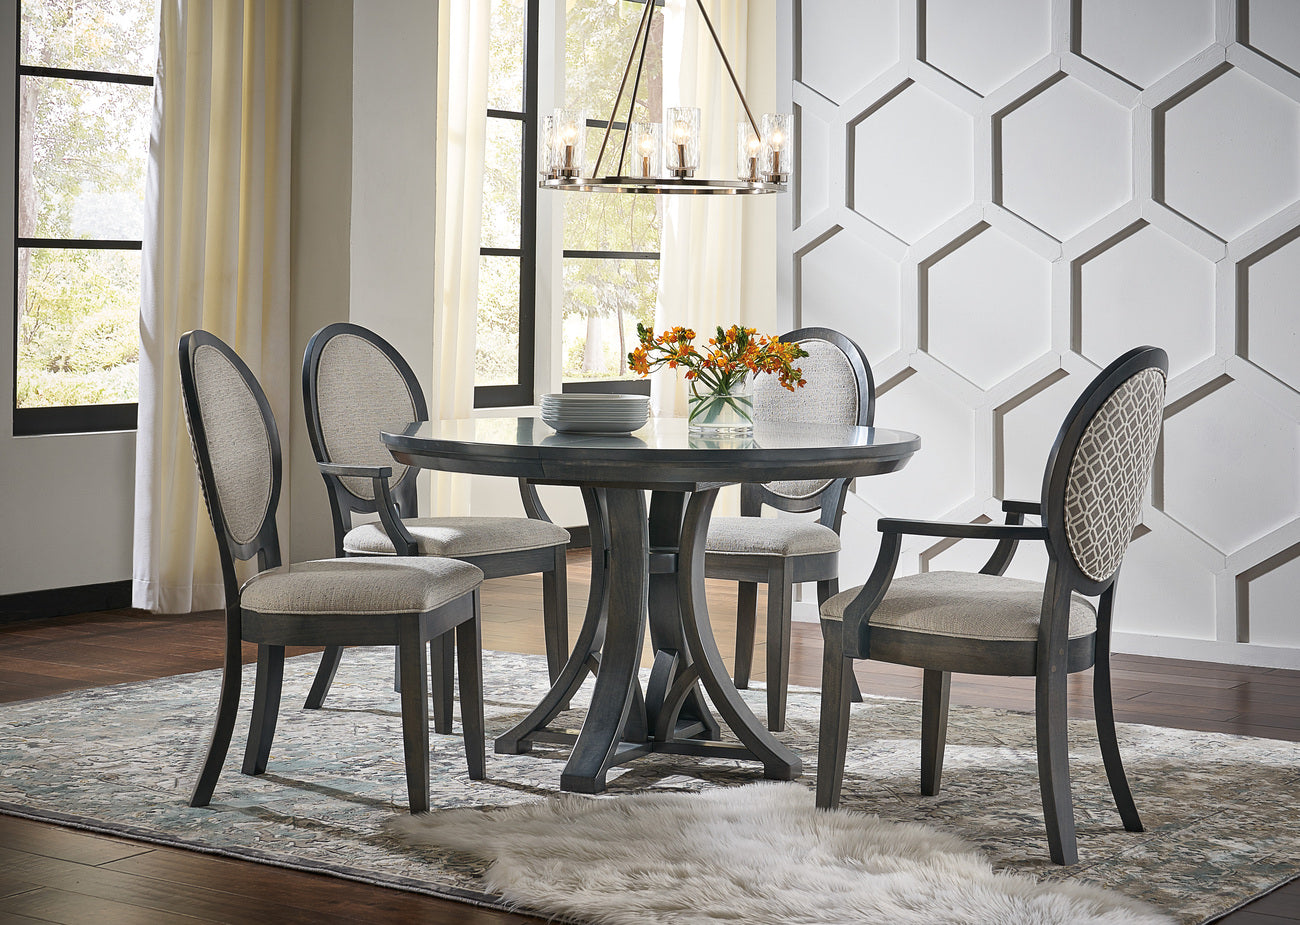 dawson single pedestal dining table in brown maple with grey flannel stain and dawson side chairs